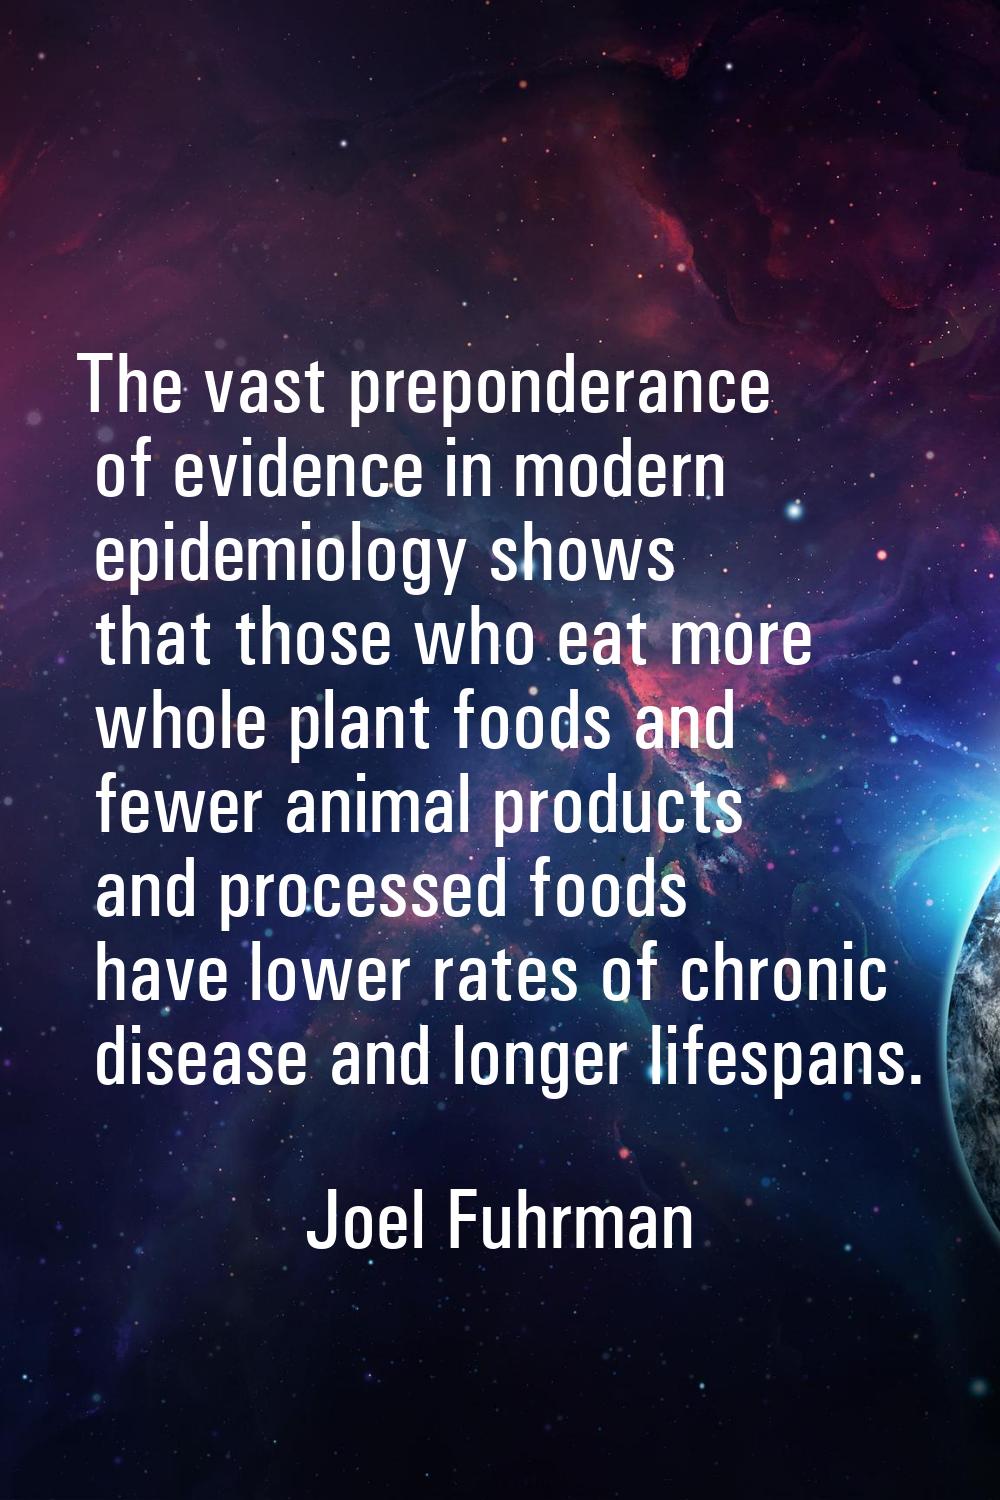 The vast preponderance of evidence in modern epidemiology shows that those who eat more whole plant